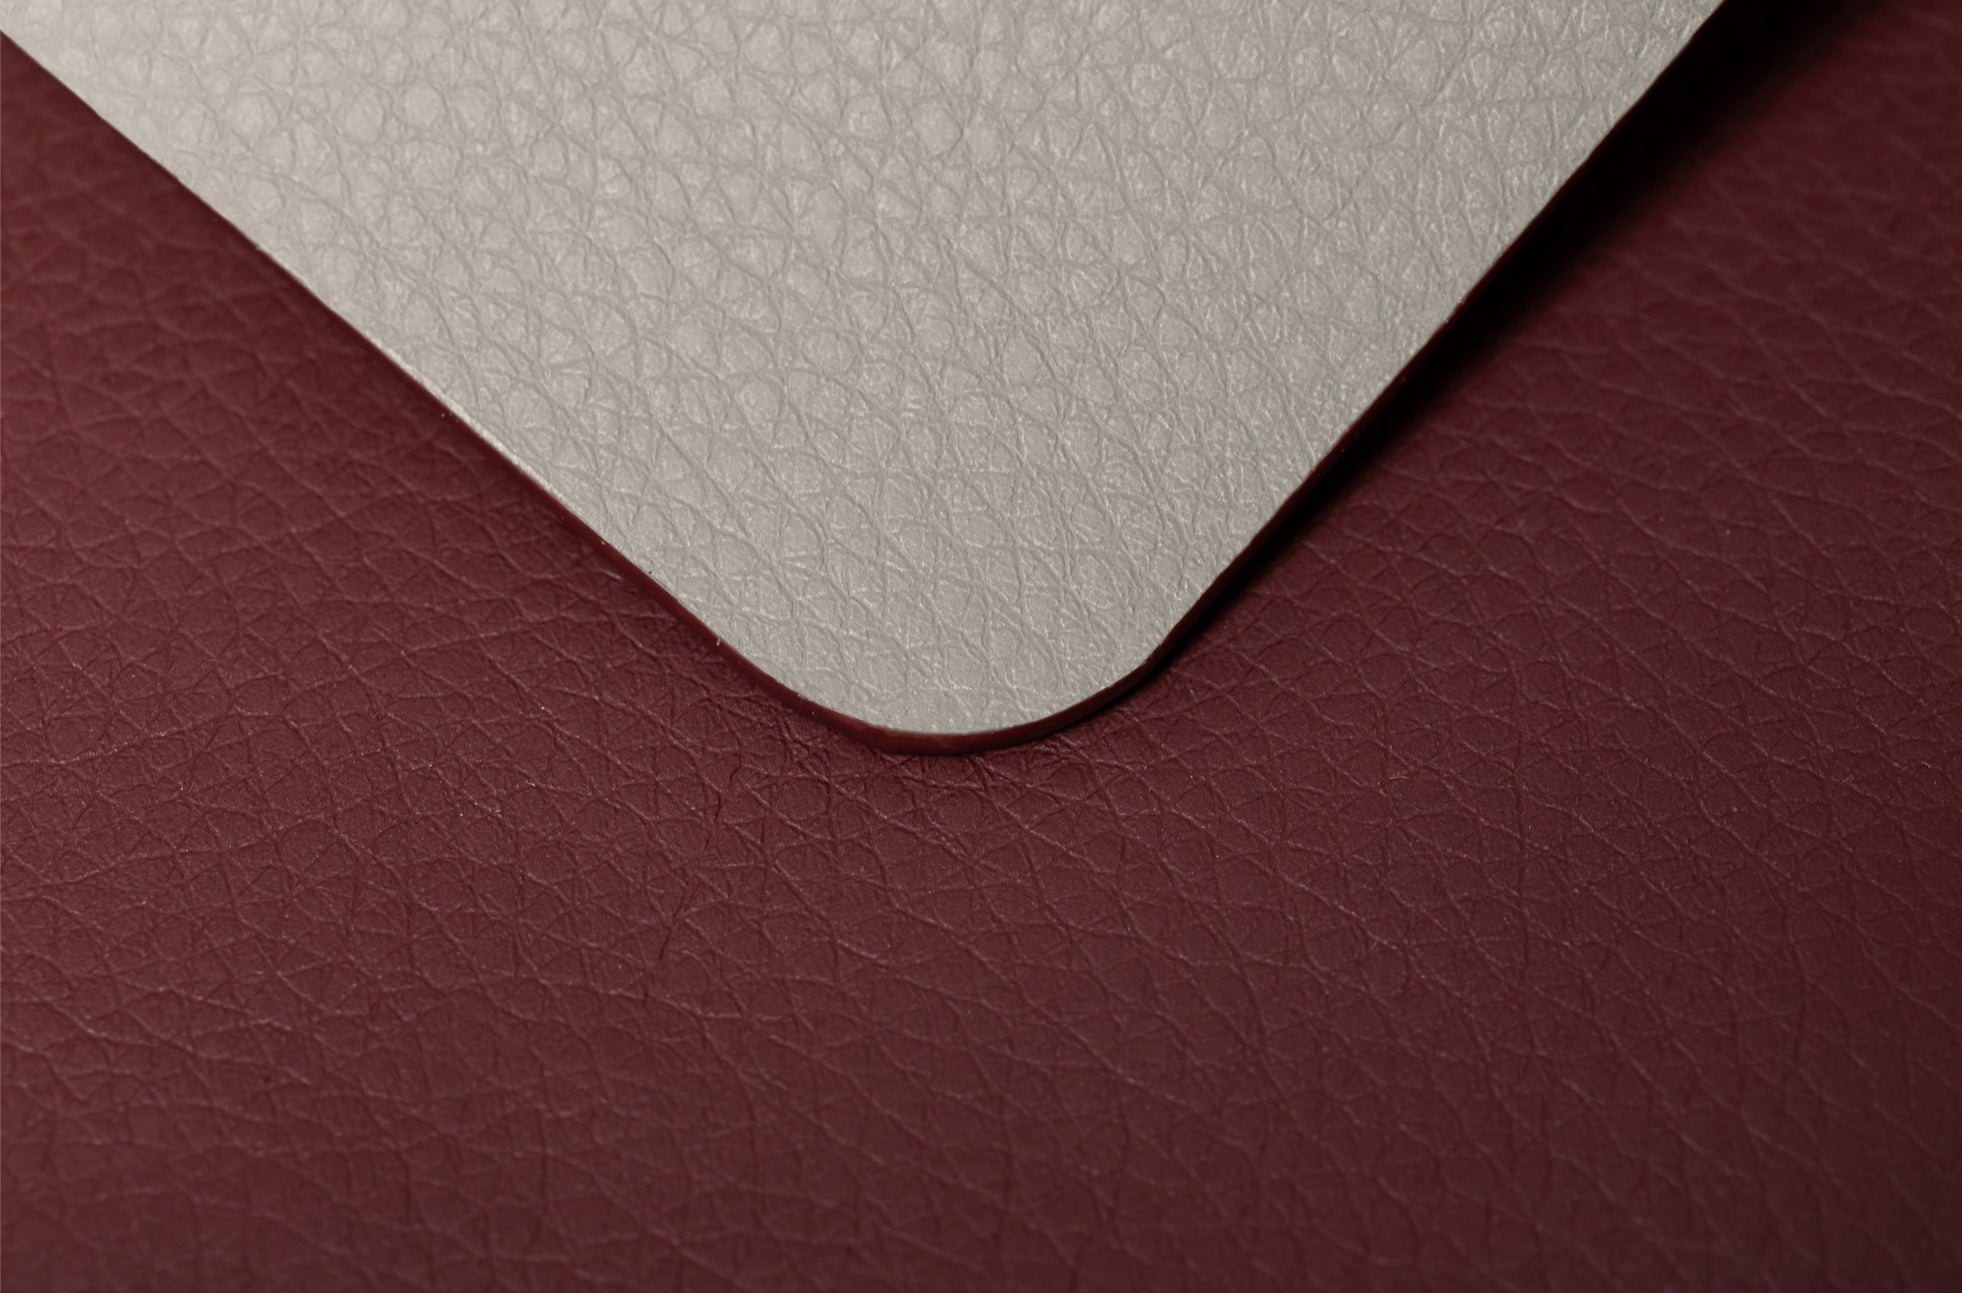 The Placemat Set - Sample Sale in Technik-Leather in Stone & Burgundy image 7